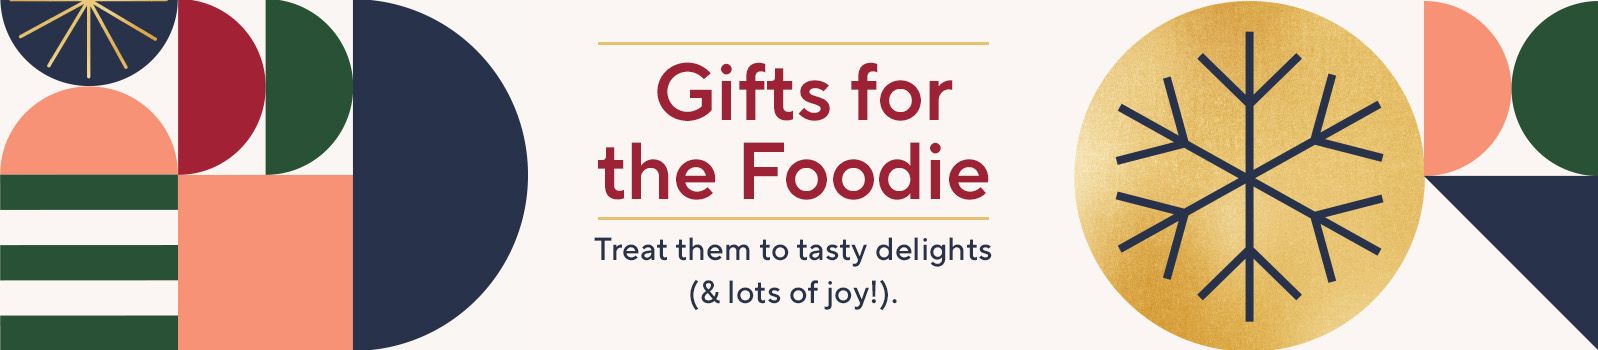 Gifts for the Foodie  Treat them to tasty delights (& lots of joy!). 